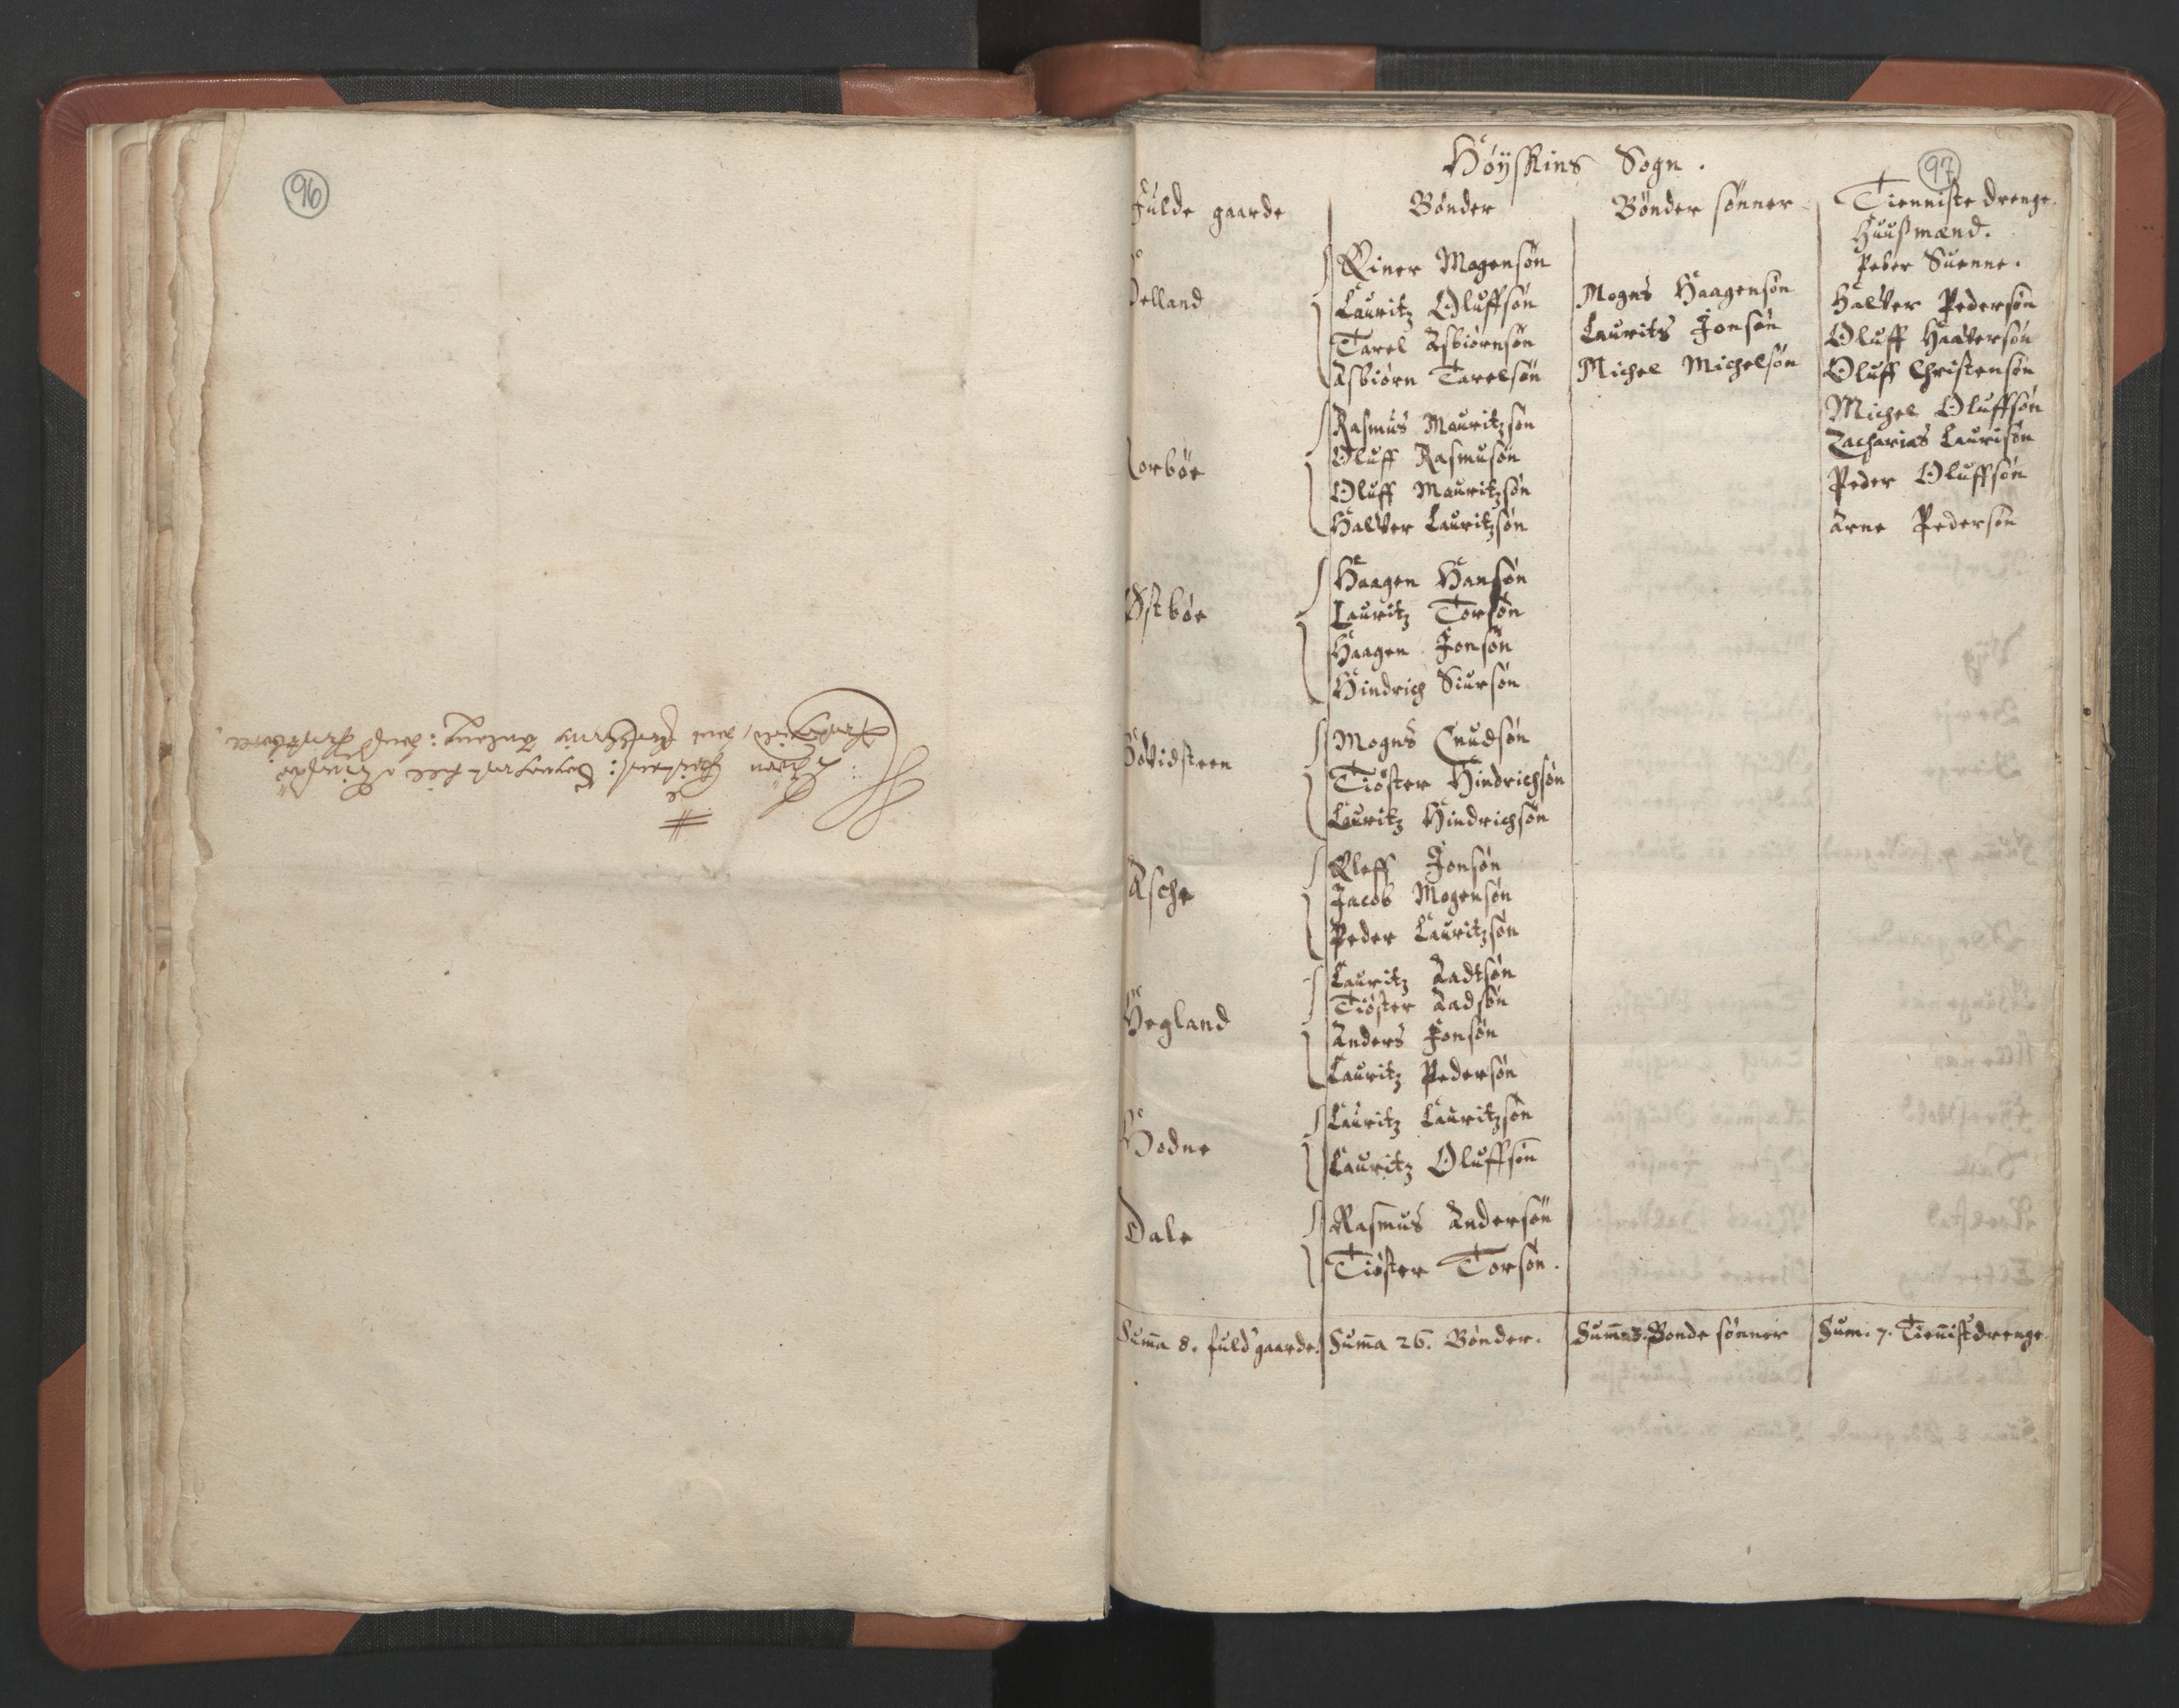 RA, Vicar's Census 1664-1666, no. 18: Stavanger deanery and Karmsund deanery, 1664-1666, p. 96-97